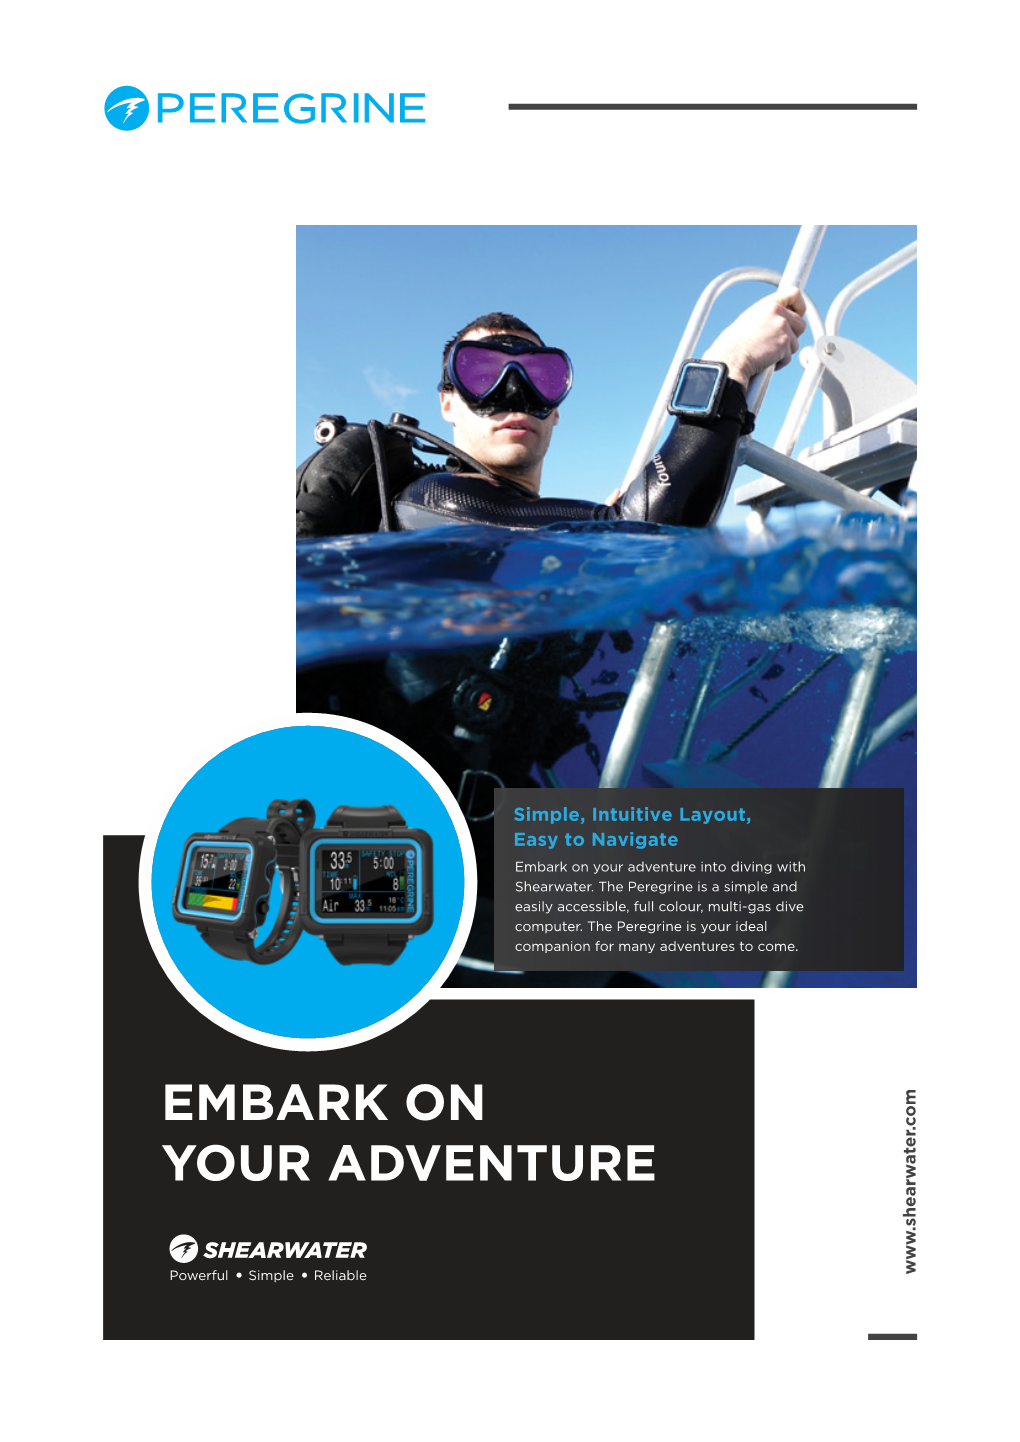 Embark on Your Adventure Into Diving with Shearwater